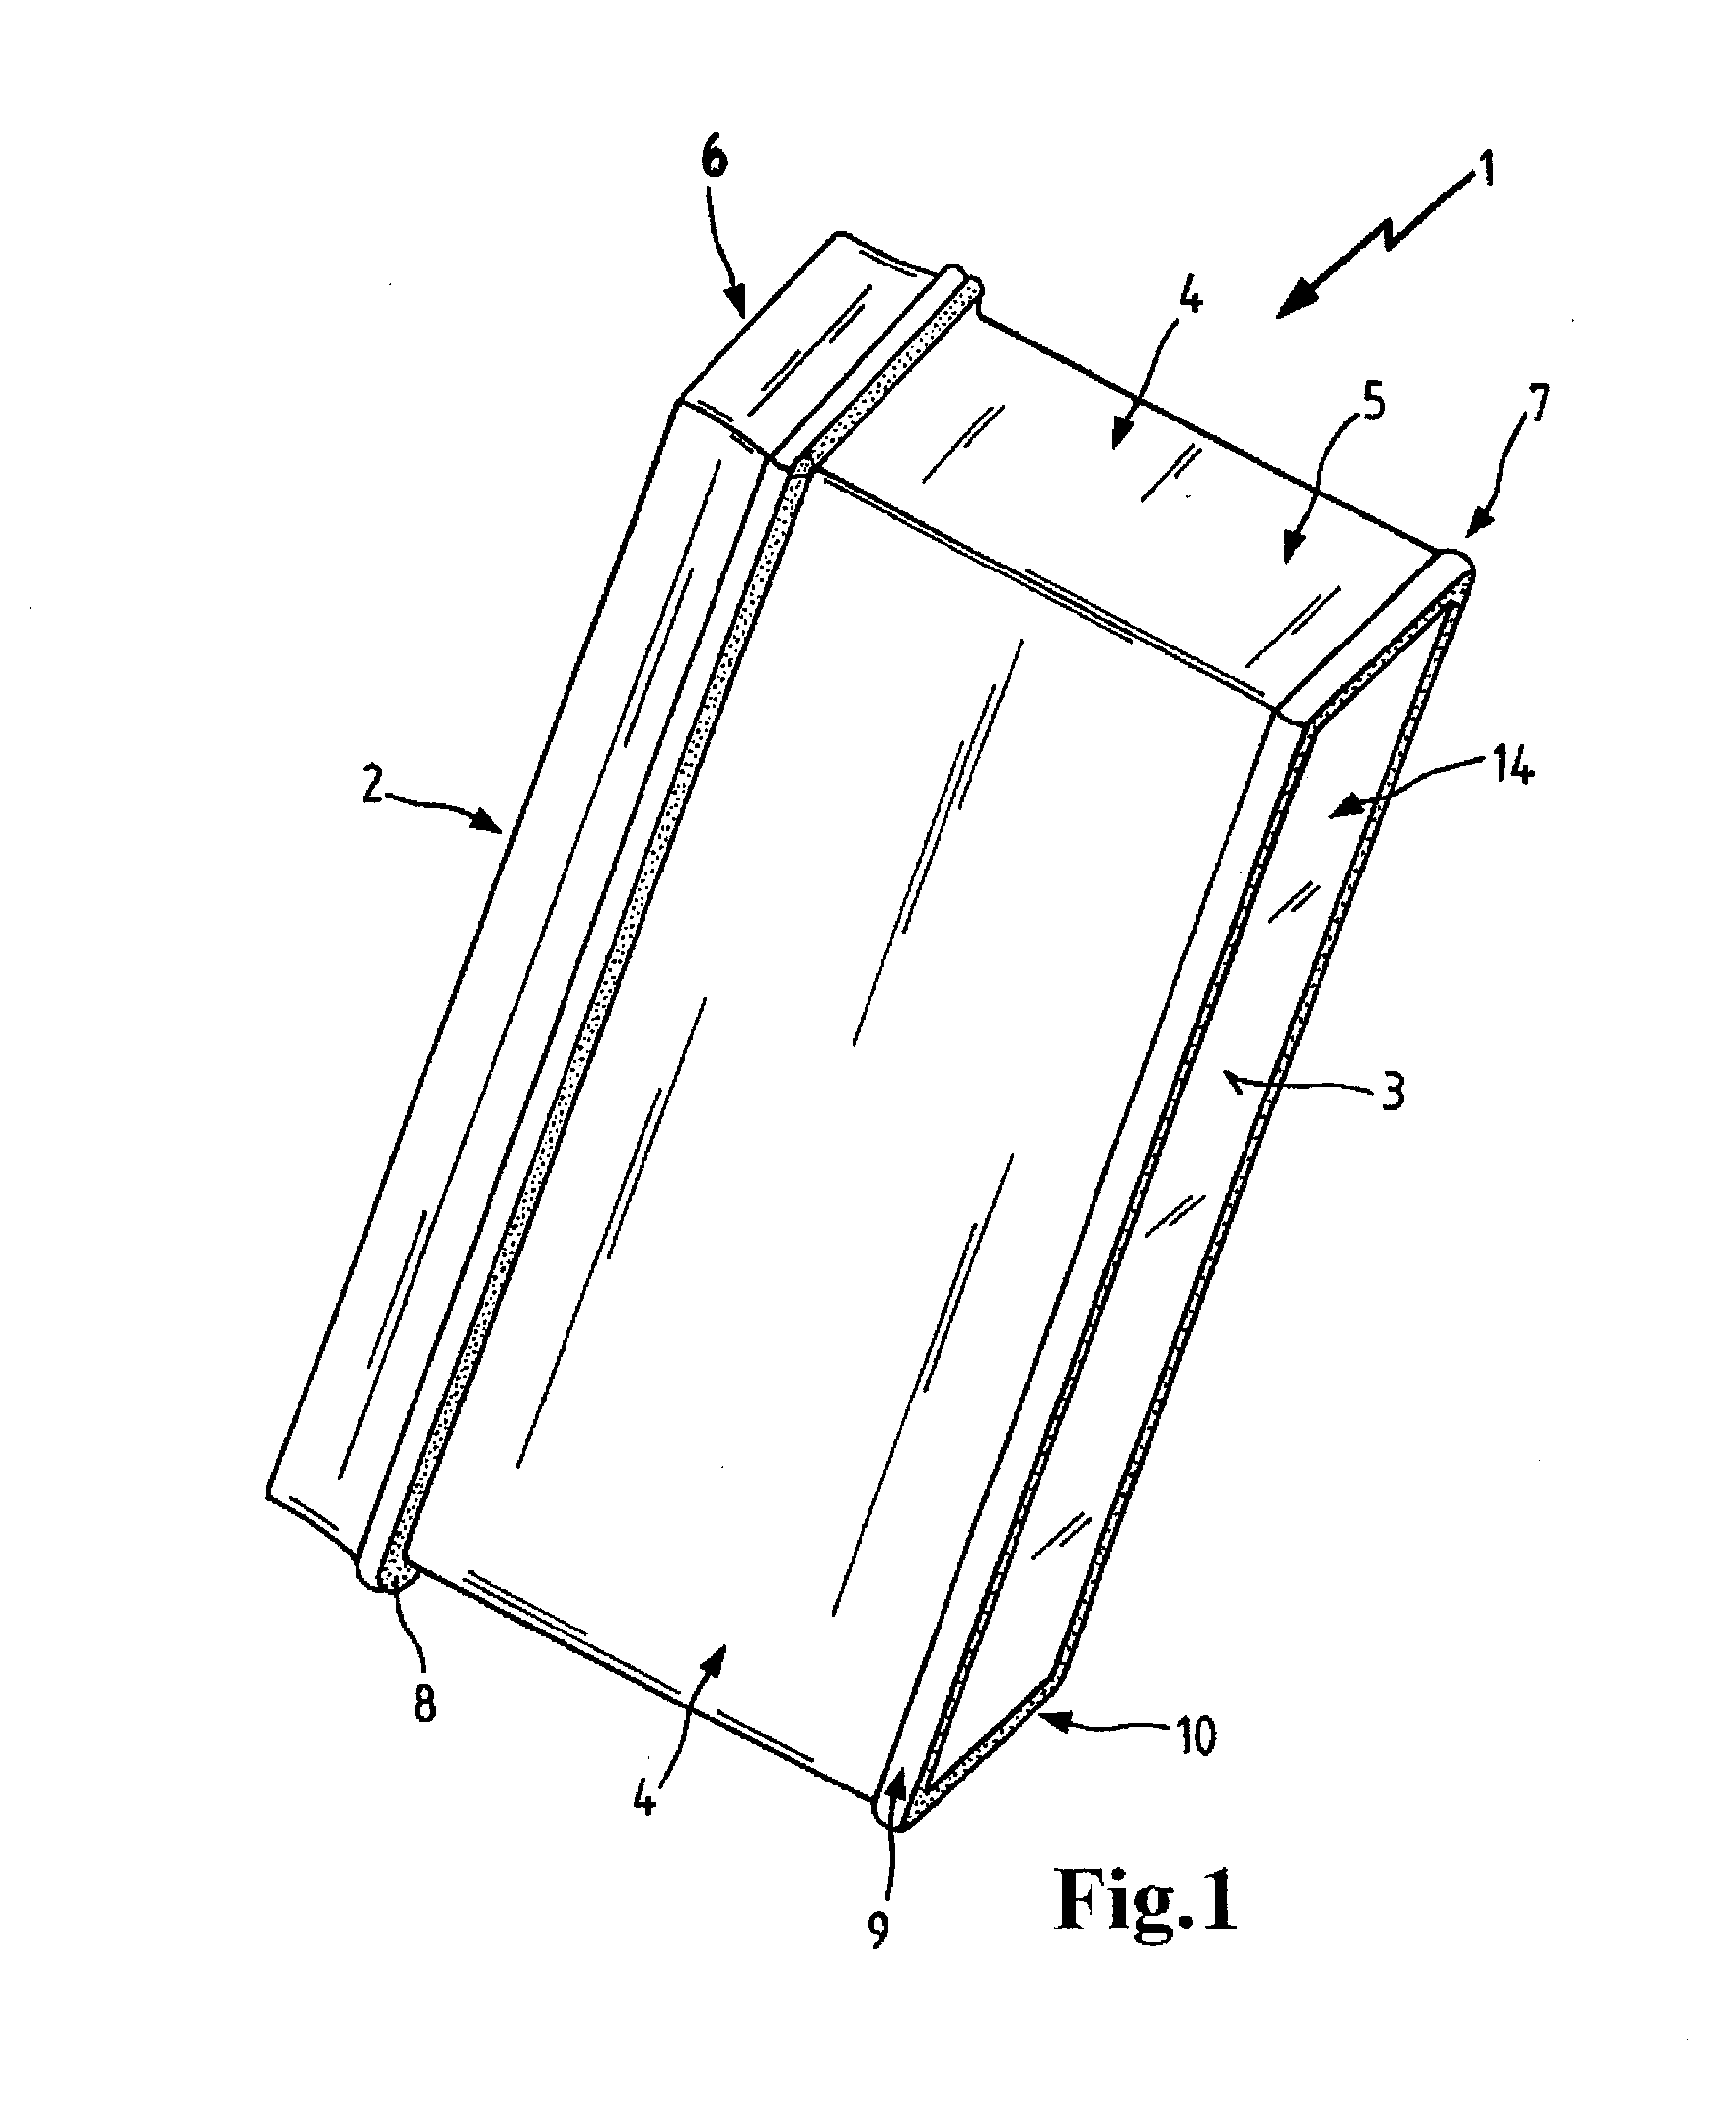 Filter for Filtering Fluids and Method for Producing the Same